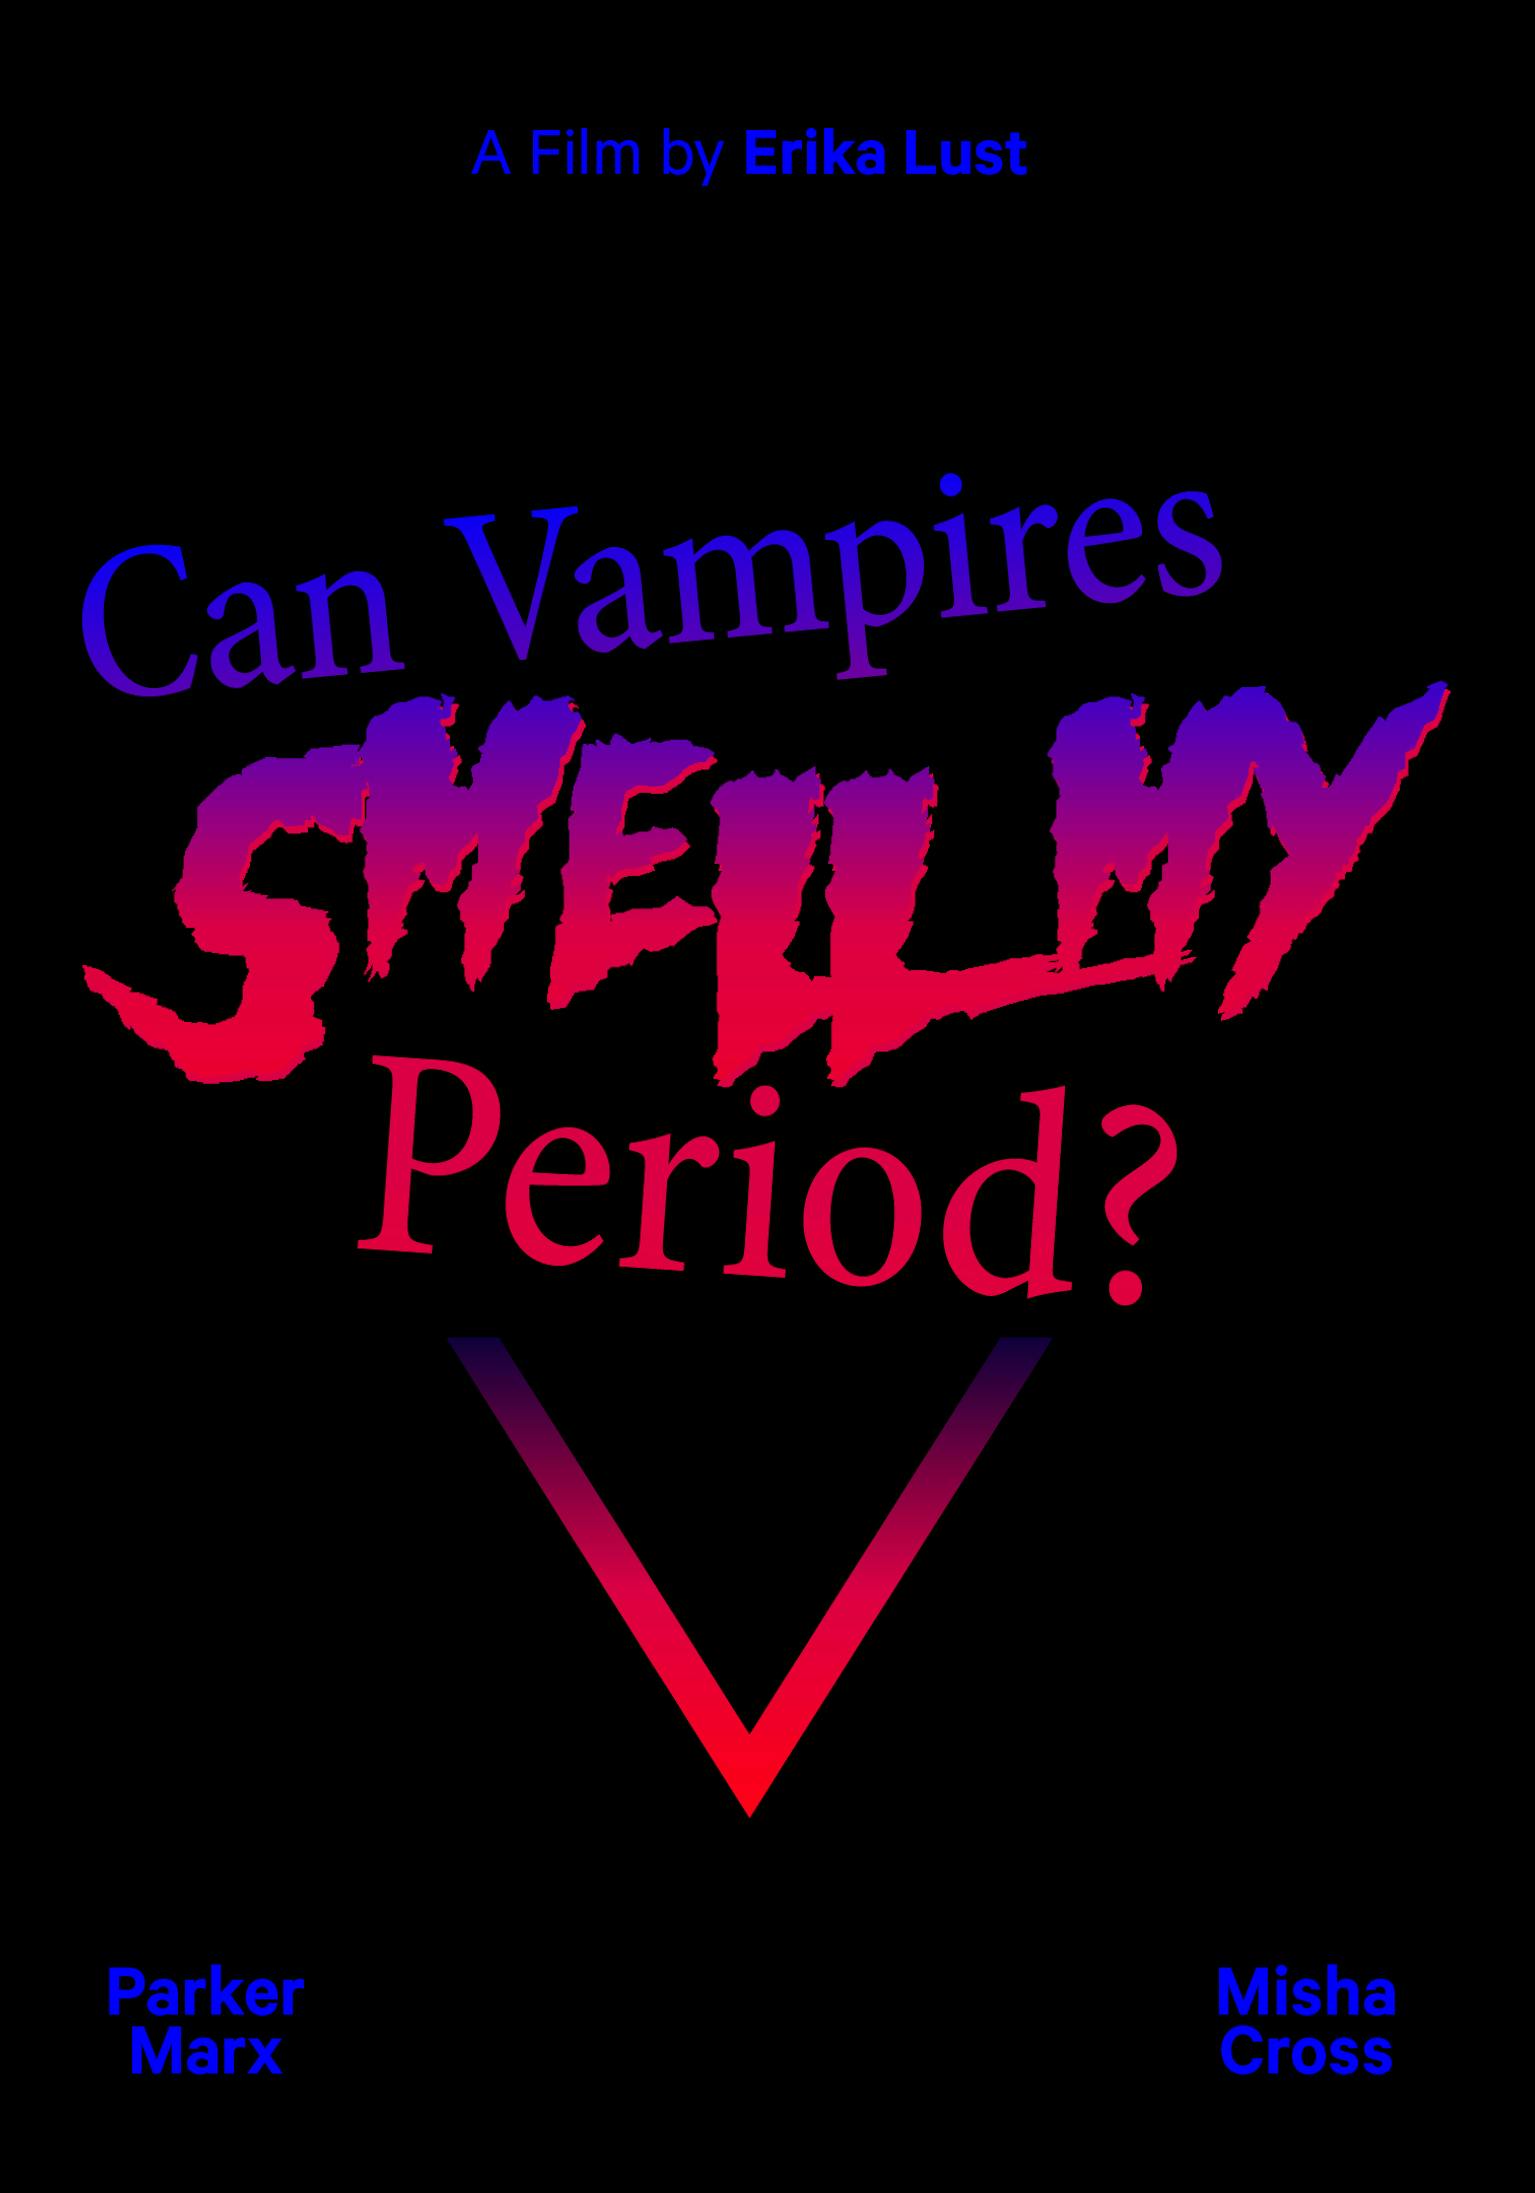 Can Vampires Smell My Period?